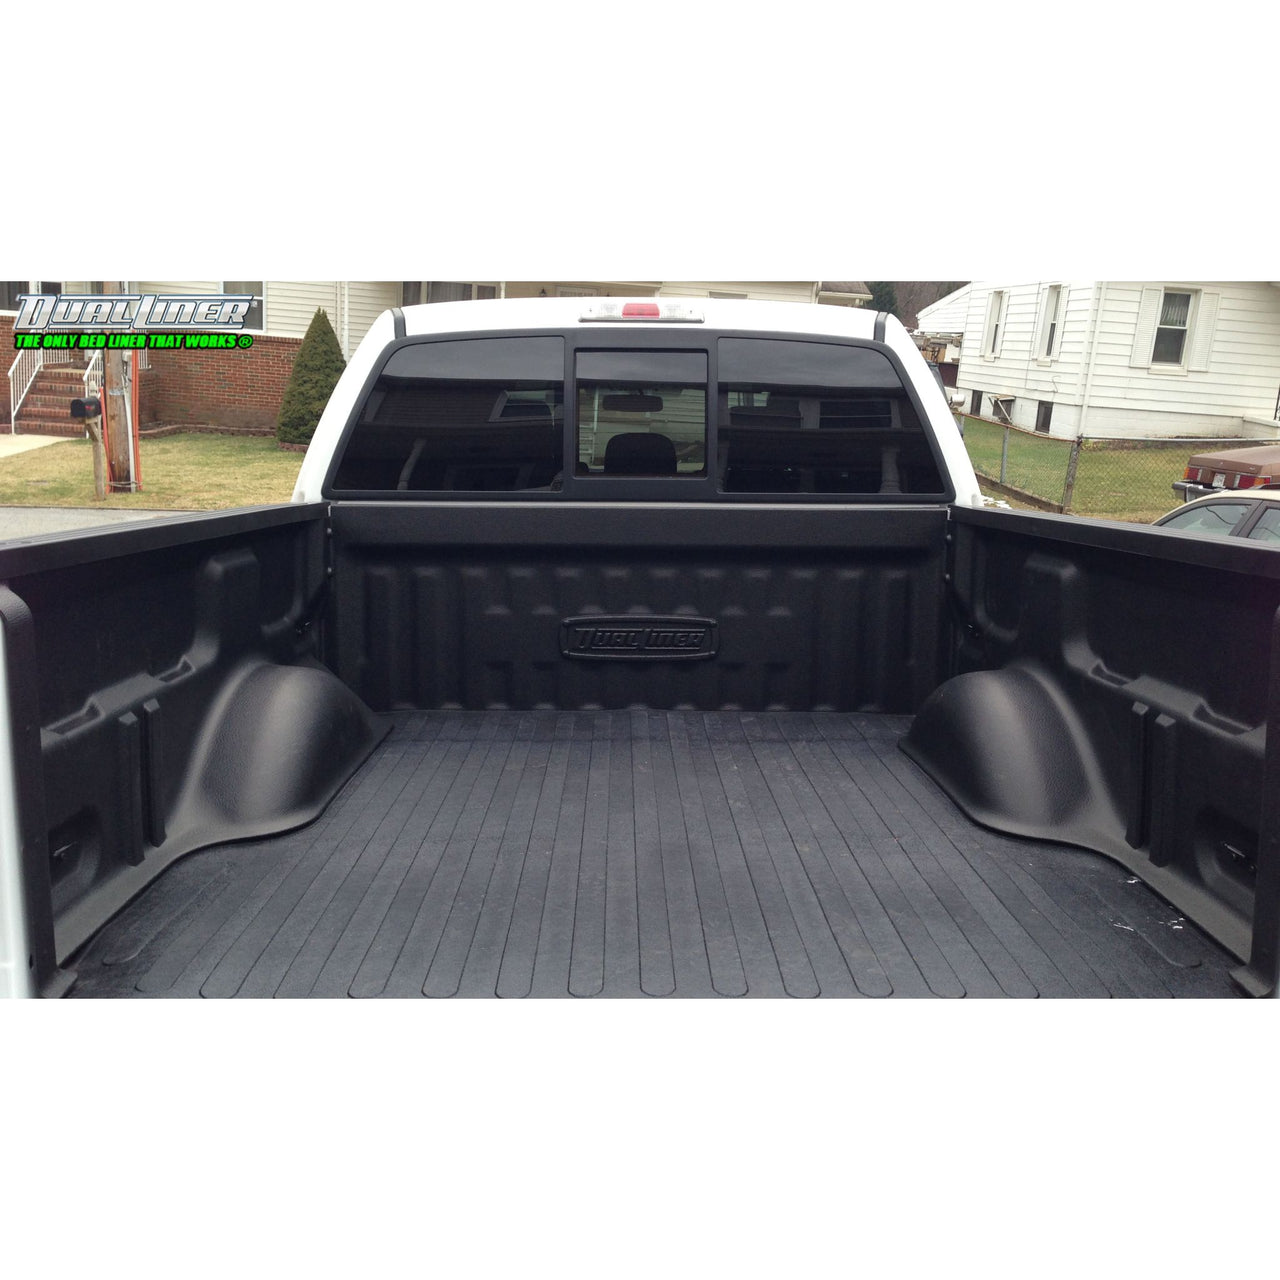 DualLiner 2021 to 2022 F-150 (WITH LED Light Bar,& Power Pack Options) - Short 5.5' Bed